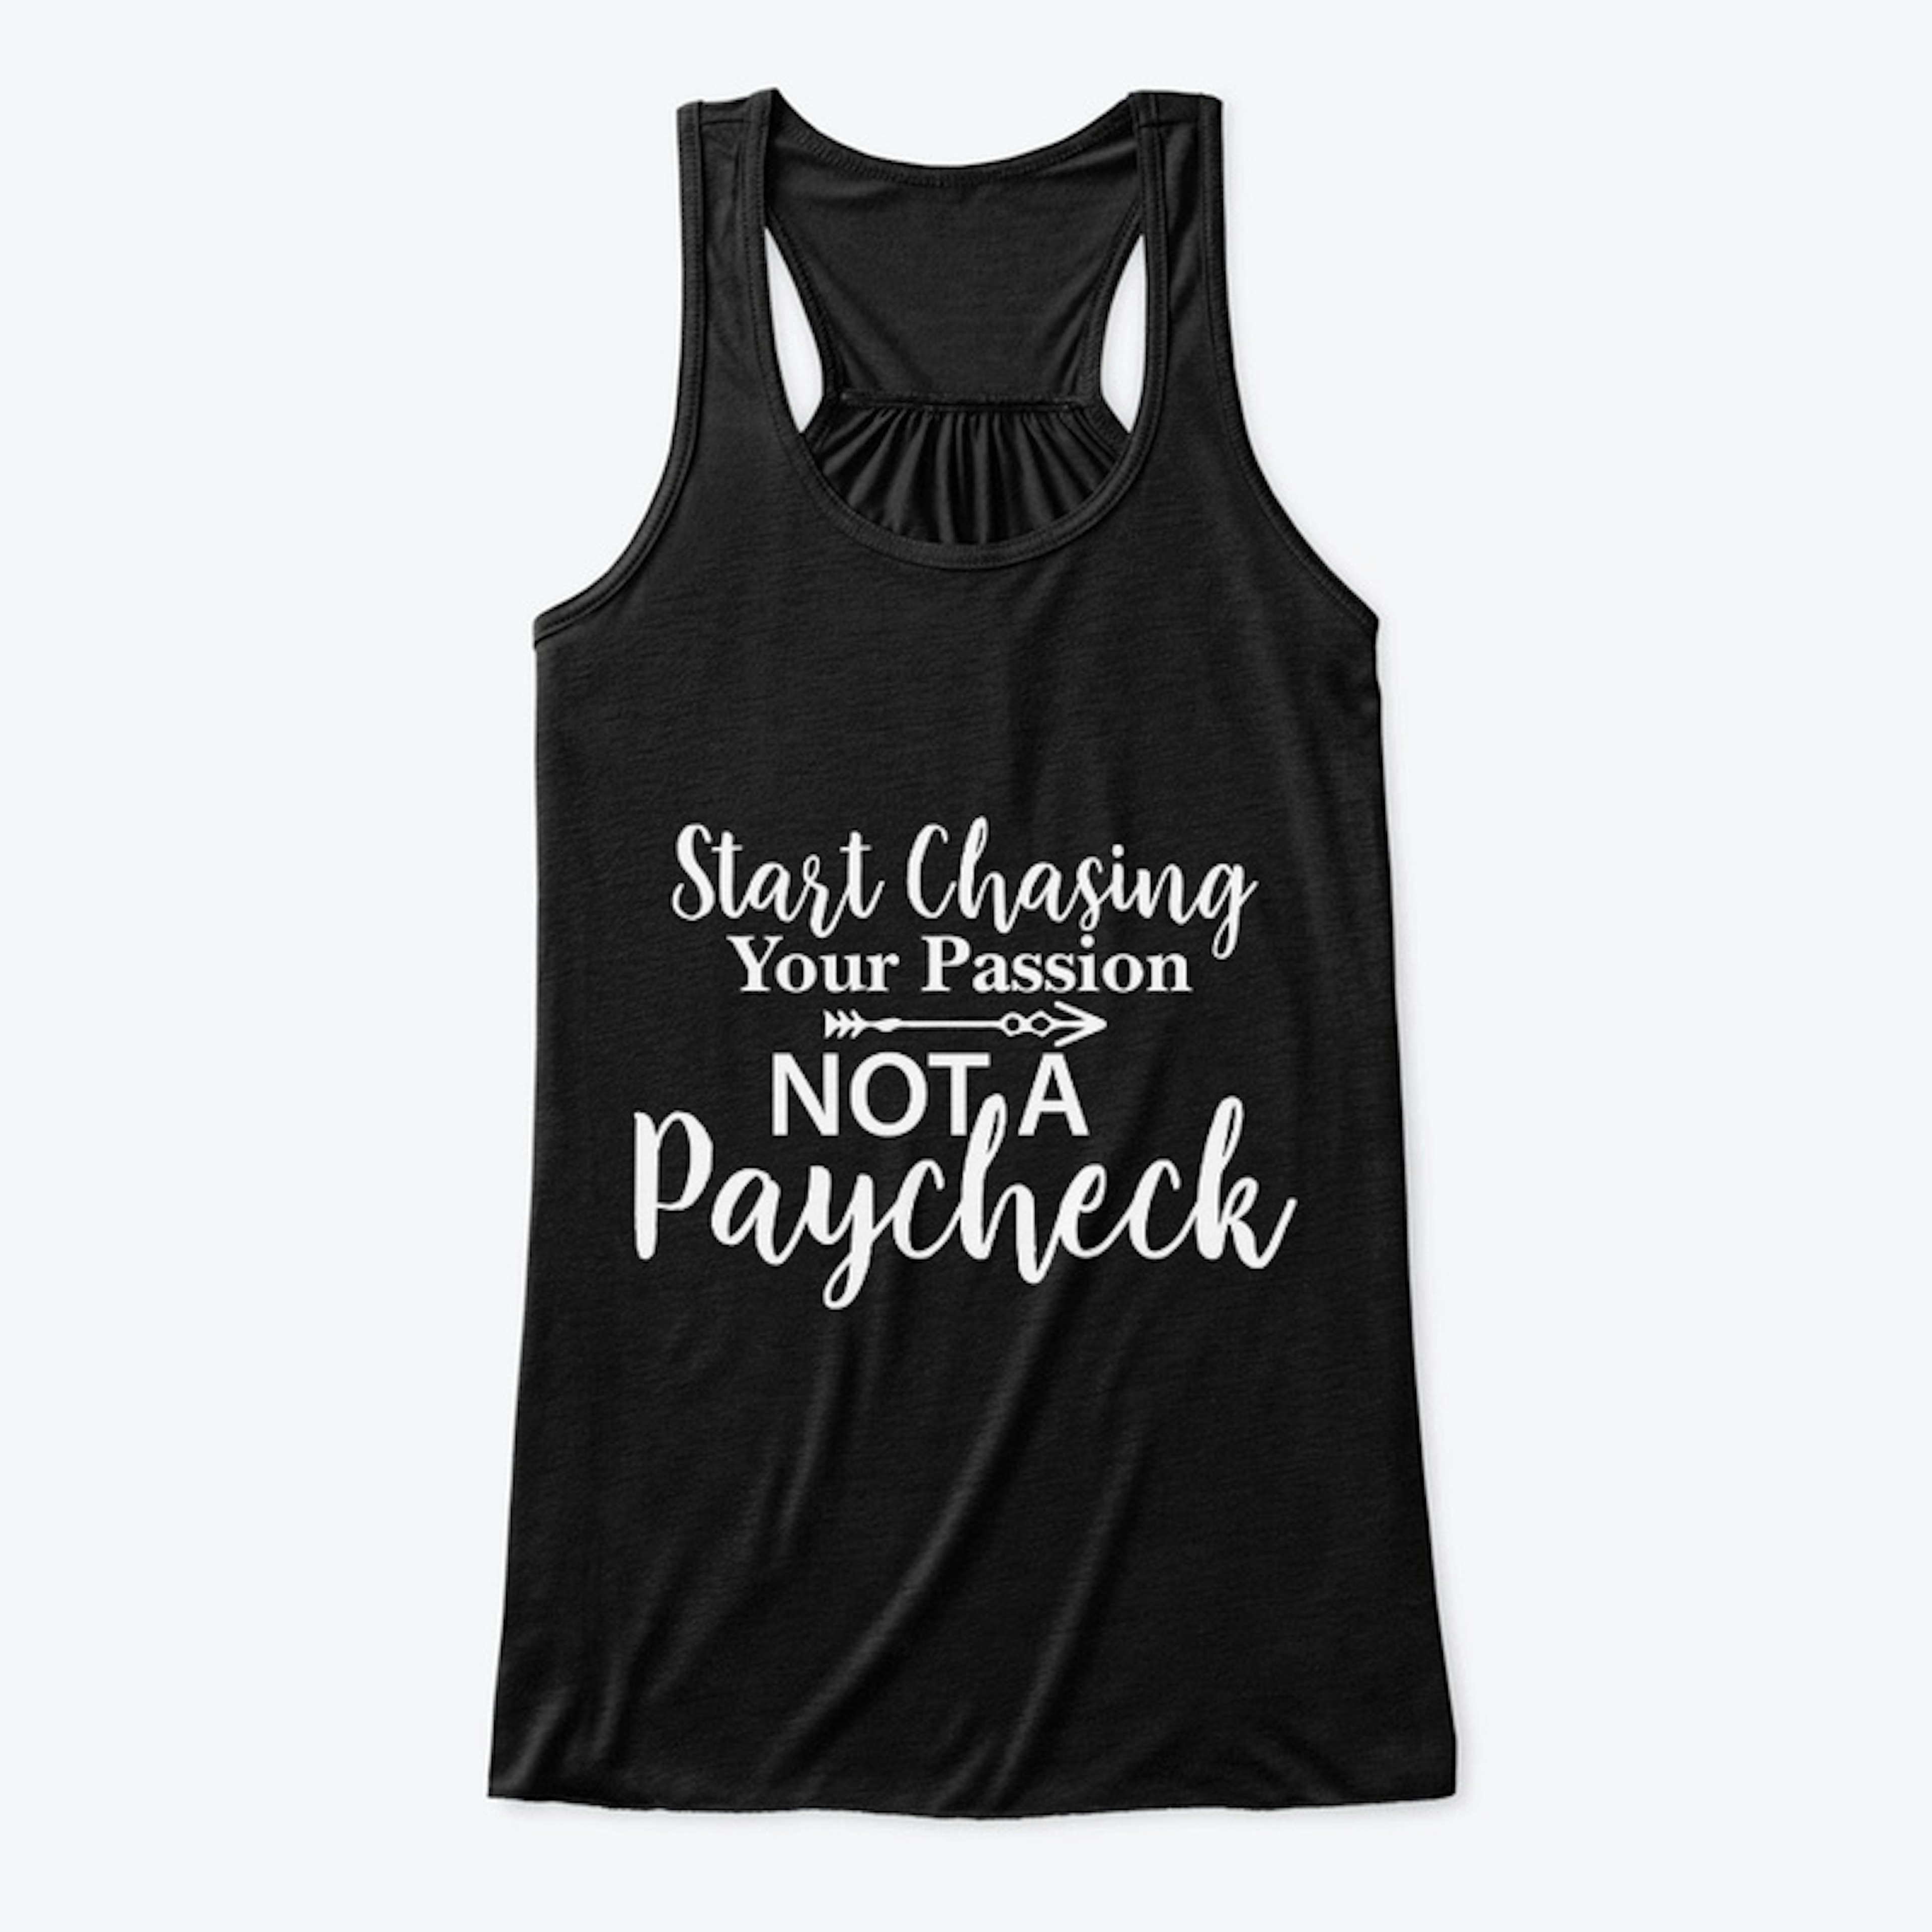 Find Your Passion (Tank)